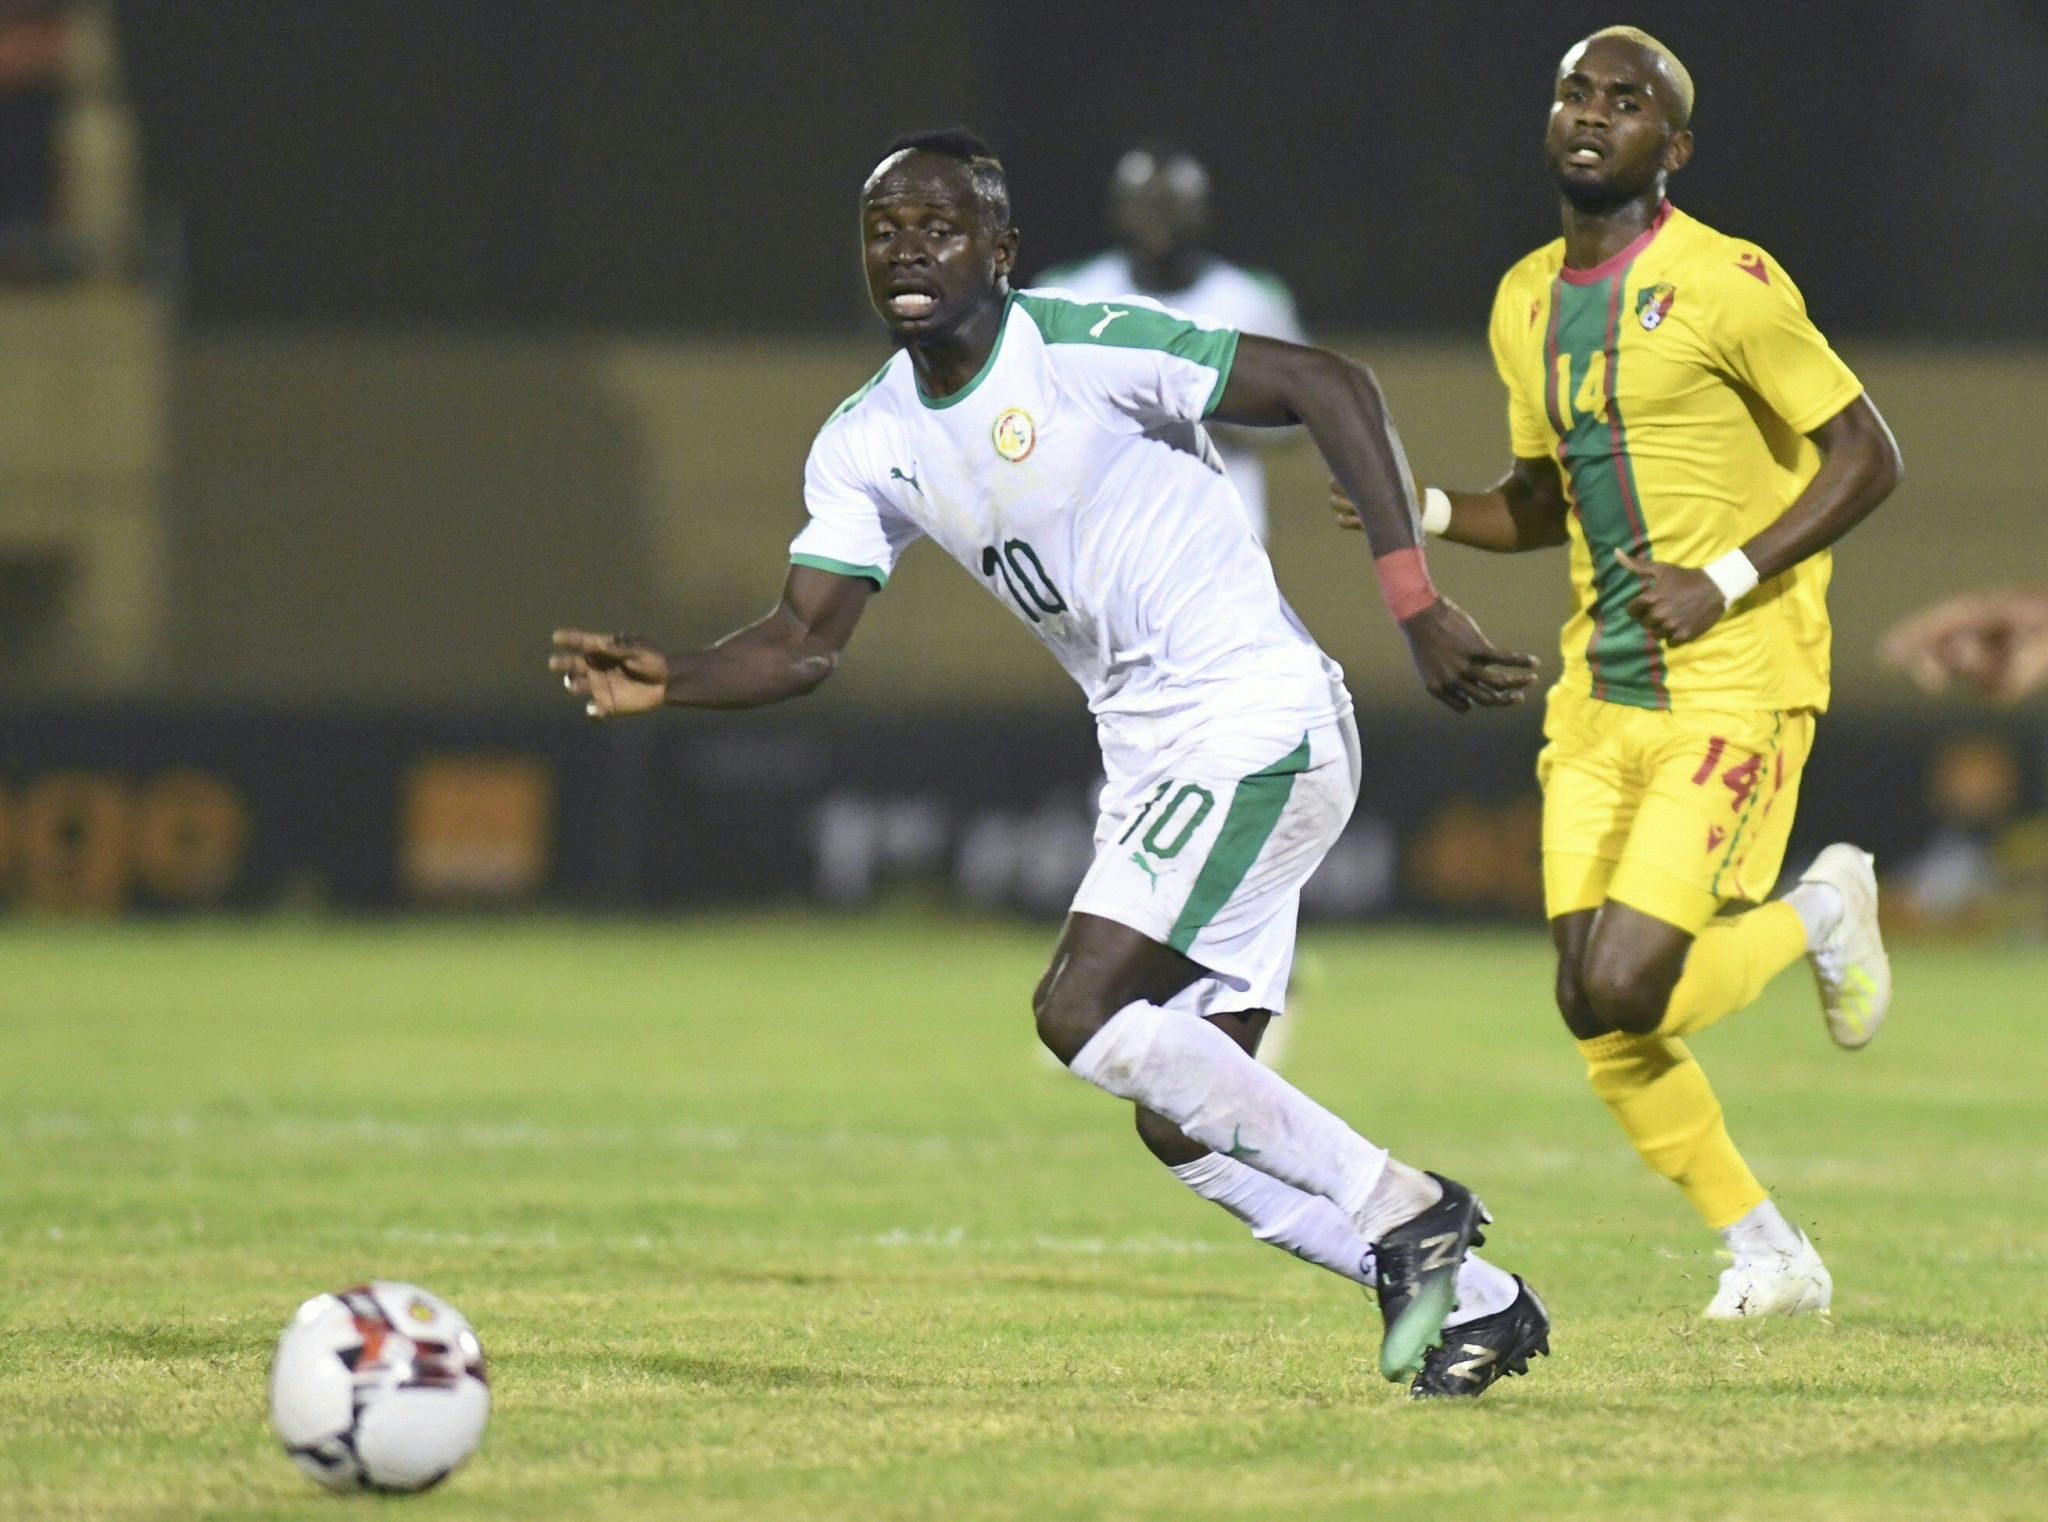 Sadio Mané in action for Senegal, who were forced to call off their home friendly against Mauritania due to coronavirus concerns last month ©Getty Images